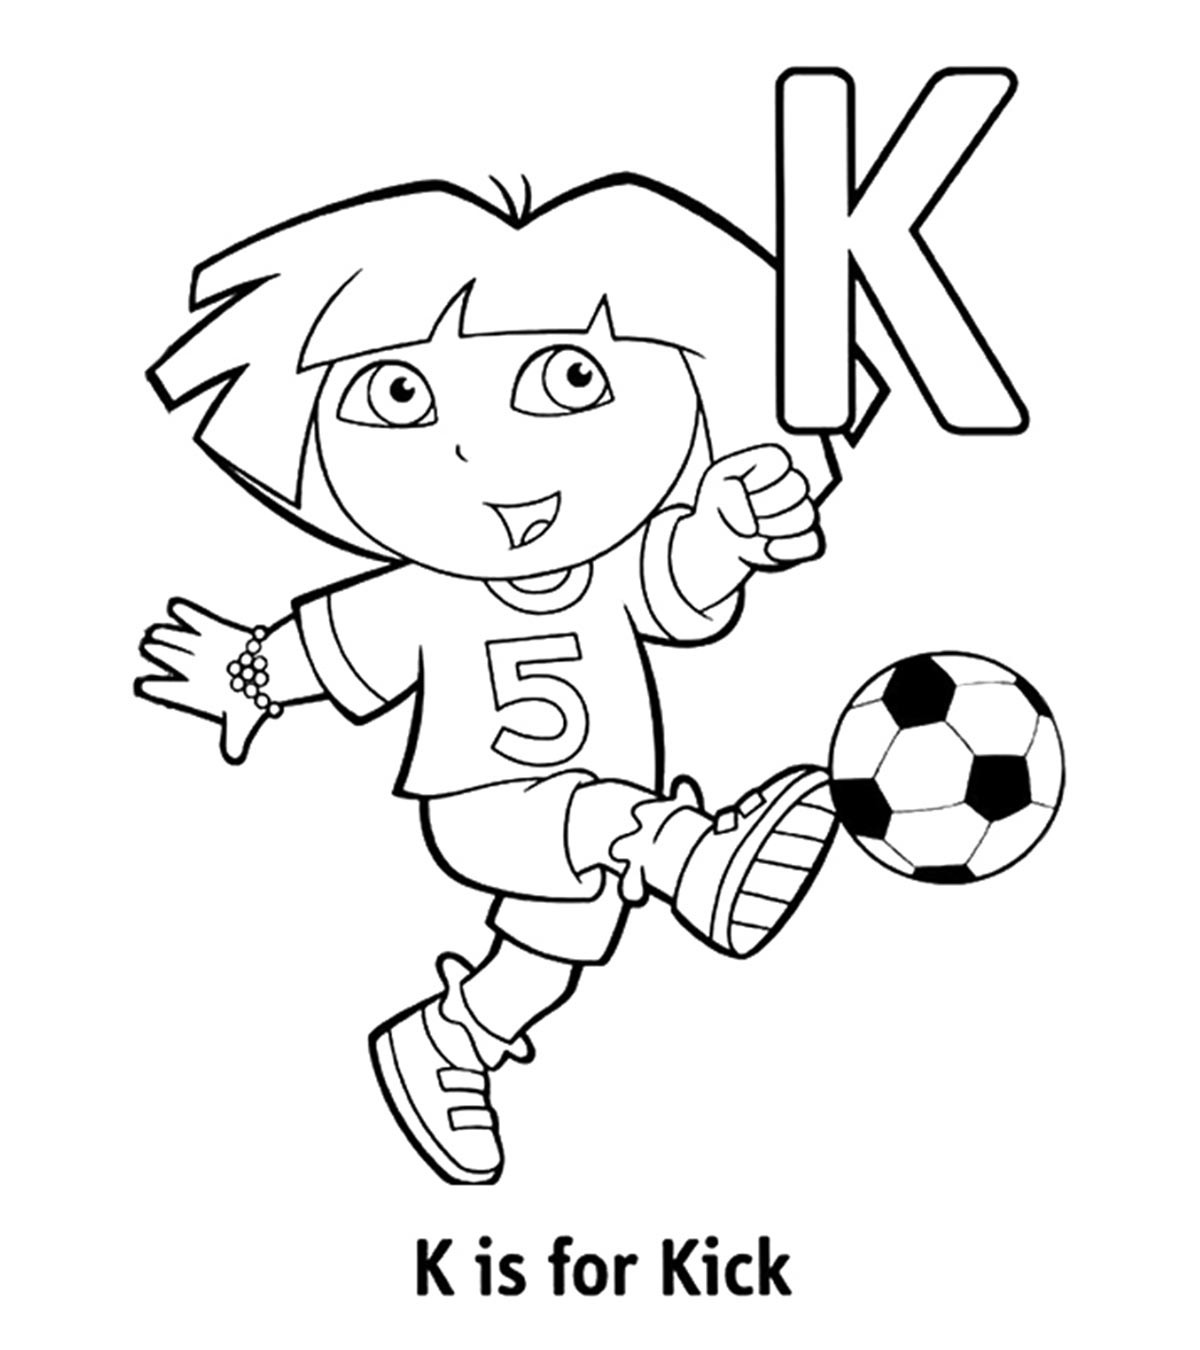 Top 10 Letter ‘K’ Coloring Pages Your Toddler Will Love To Learn & Color